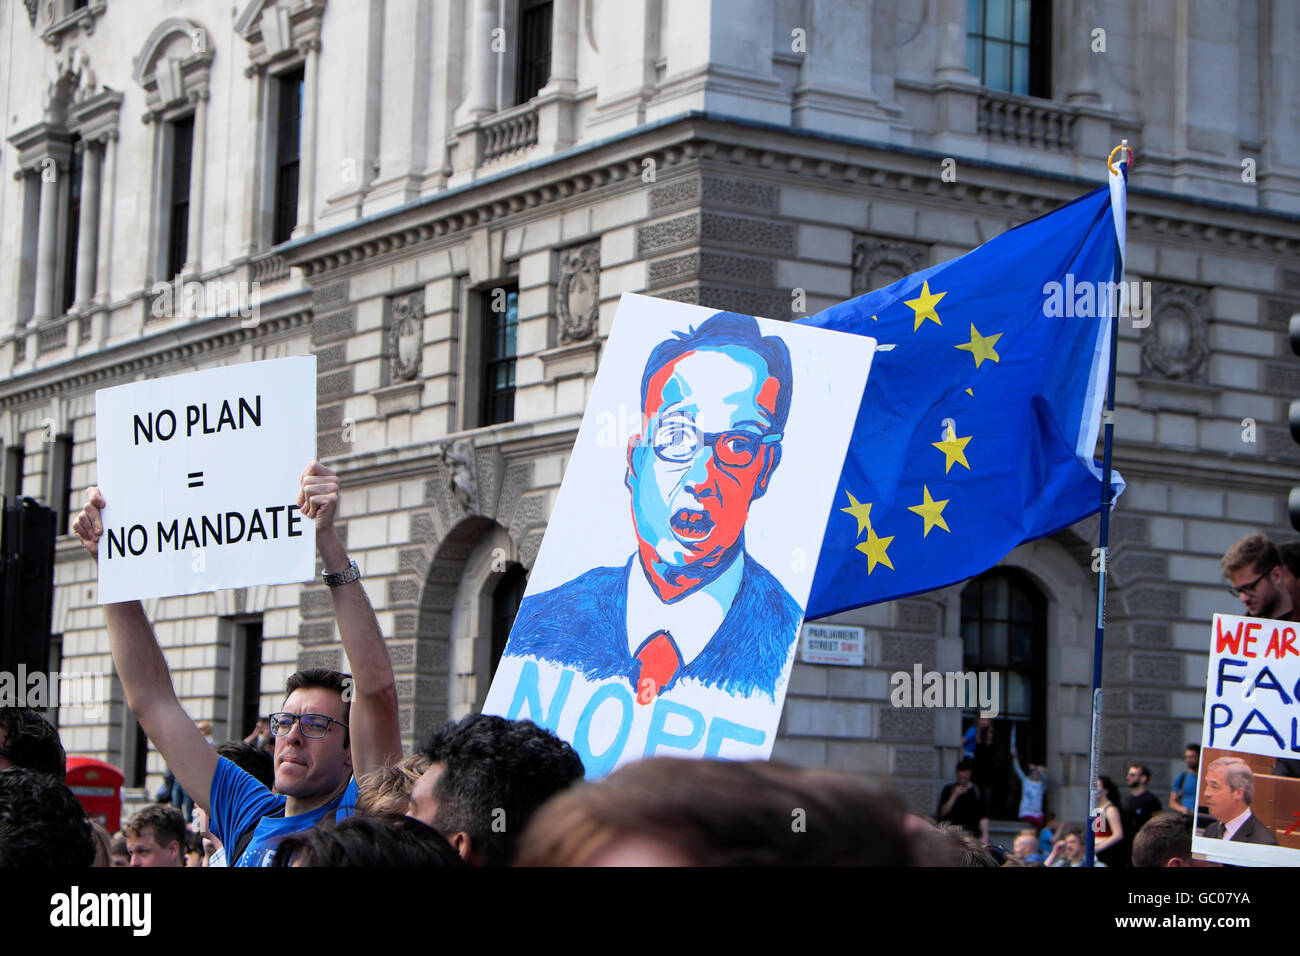 Michael Gove poster and NO PLAN NO MANDATE sign at the Anti Brexit Protest on 2nd July 2016  in London England  KATHY DEWITT Stock Photo